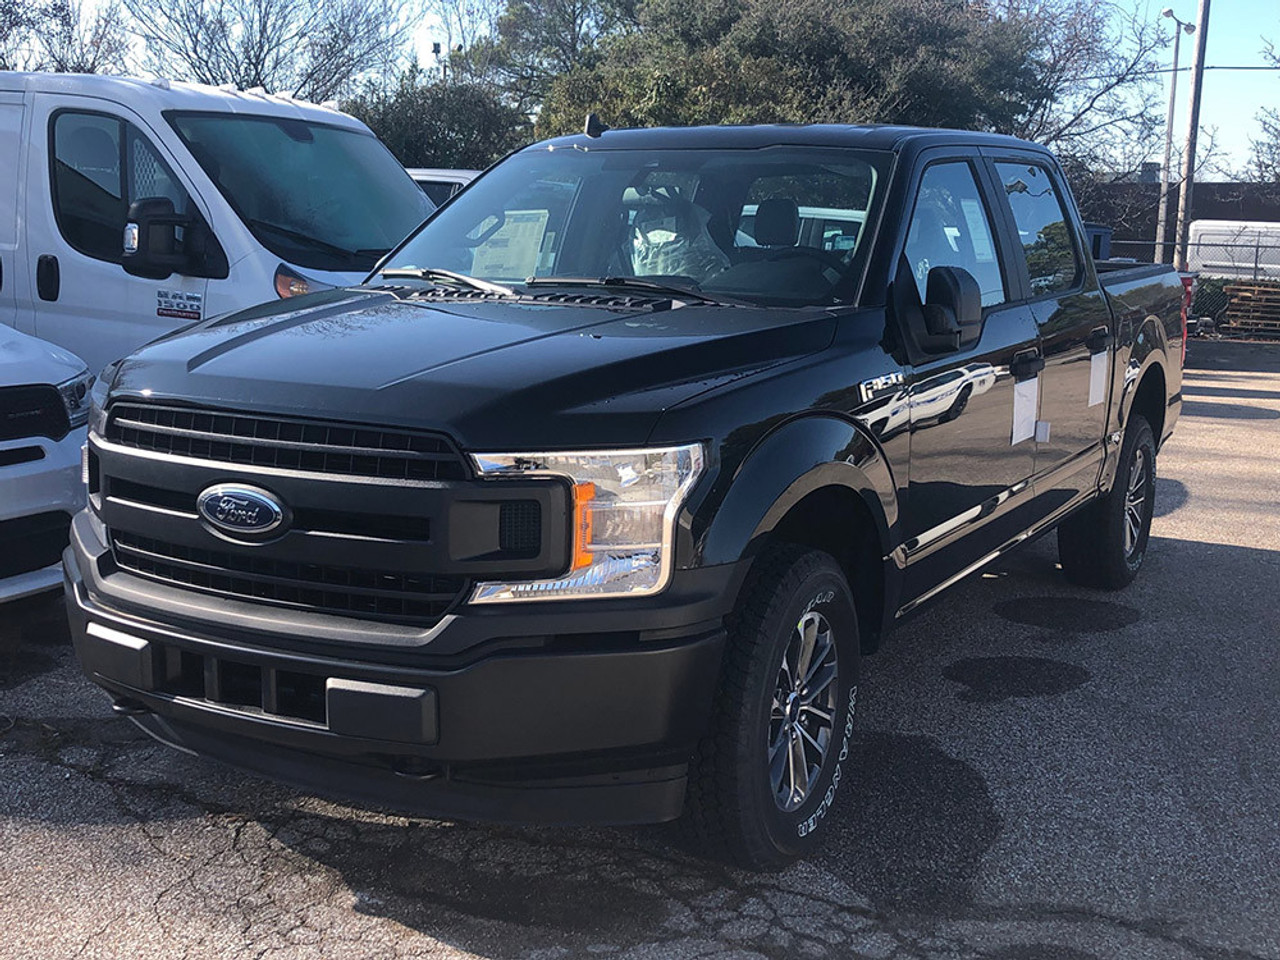 New 2023 Black F-150 PPV Police Responder 4x4 ready to be built as an Admin Package (Emergency Lighting, Siren, Controller,  Console, etc.), + Delivery, TK23F150-B7